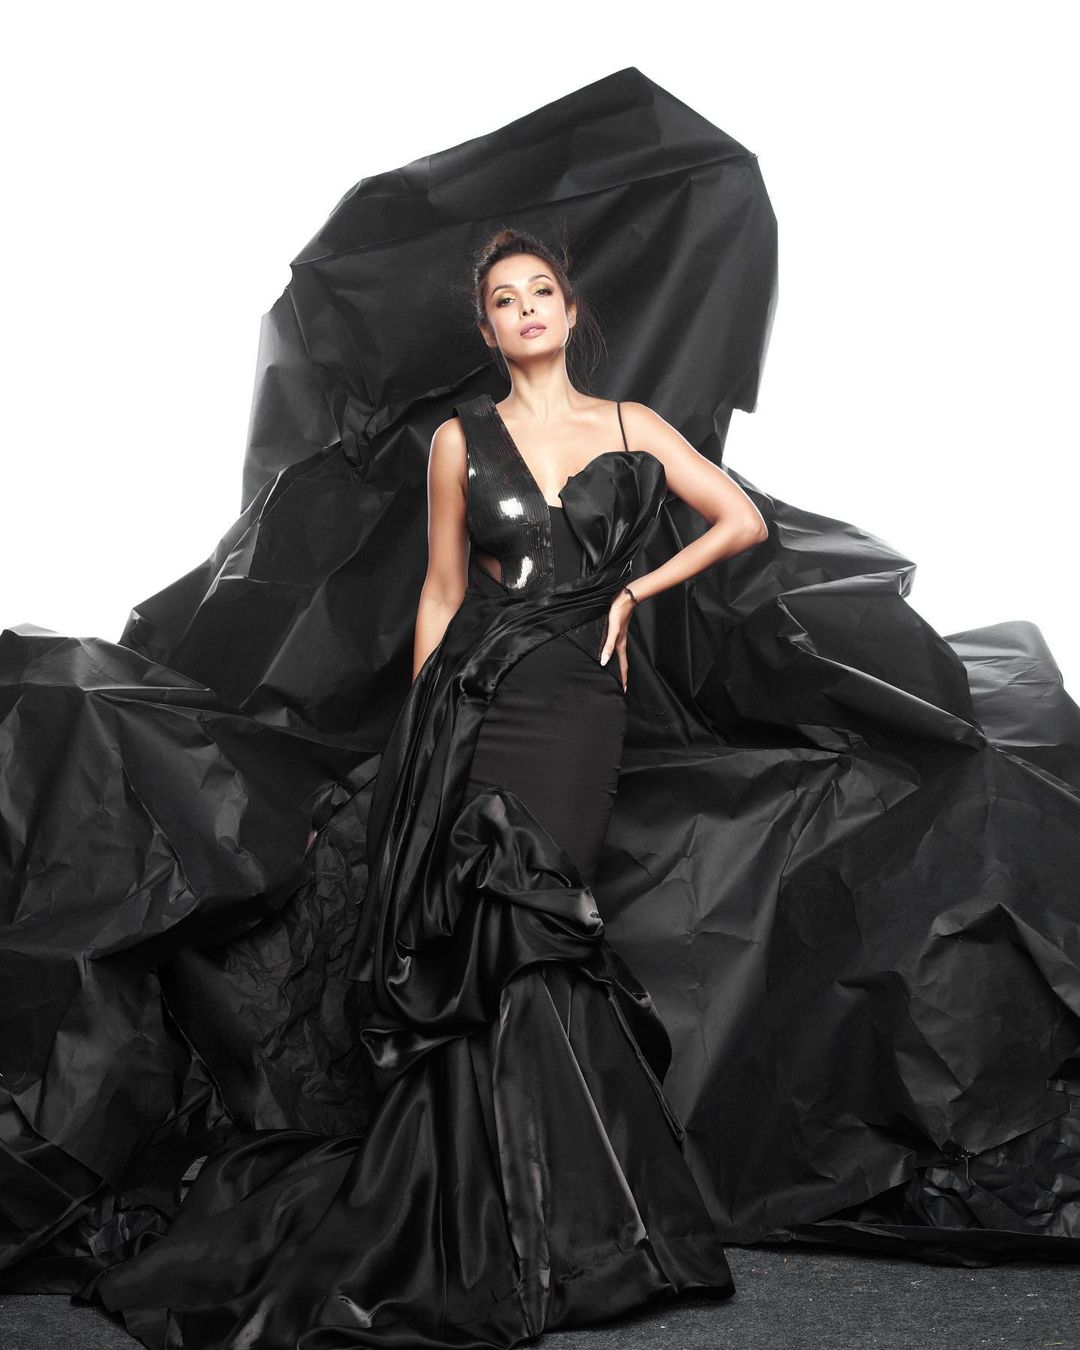 Malaika Arora is sending internet into a tizzy with her ultra glam photoshoot in a flamboyant black gown